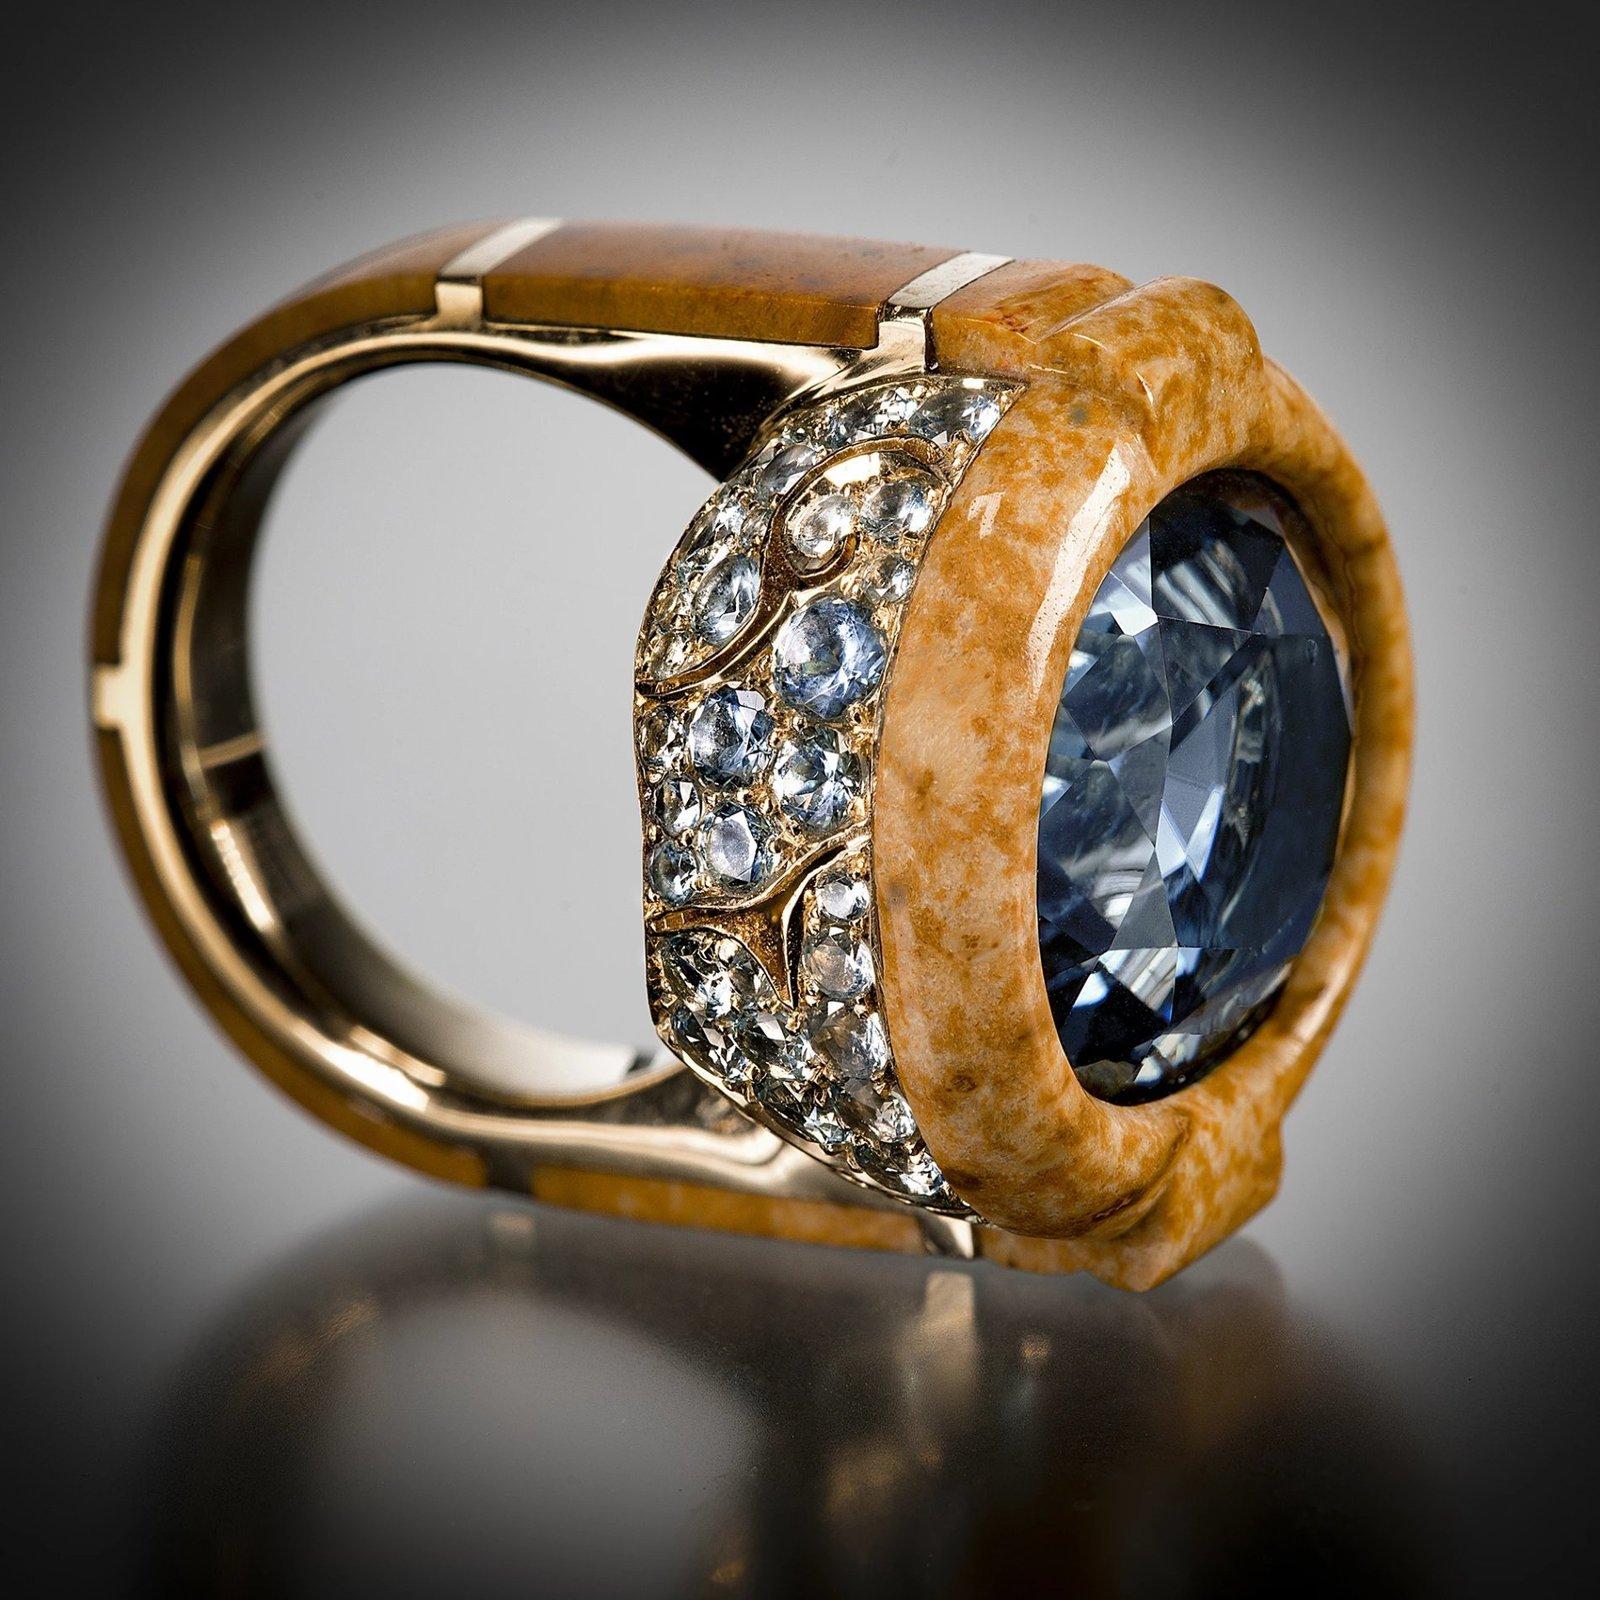 Varney’s Gion ring is named after Kyoto’s most famous Geisha district. It centers on a Sterling Blue tourmaline weighing approximately 4.6 carats, trimmed with petrified palm wood and set in a pierced gold “cloud motif” bowl that is pave set with